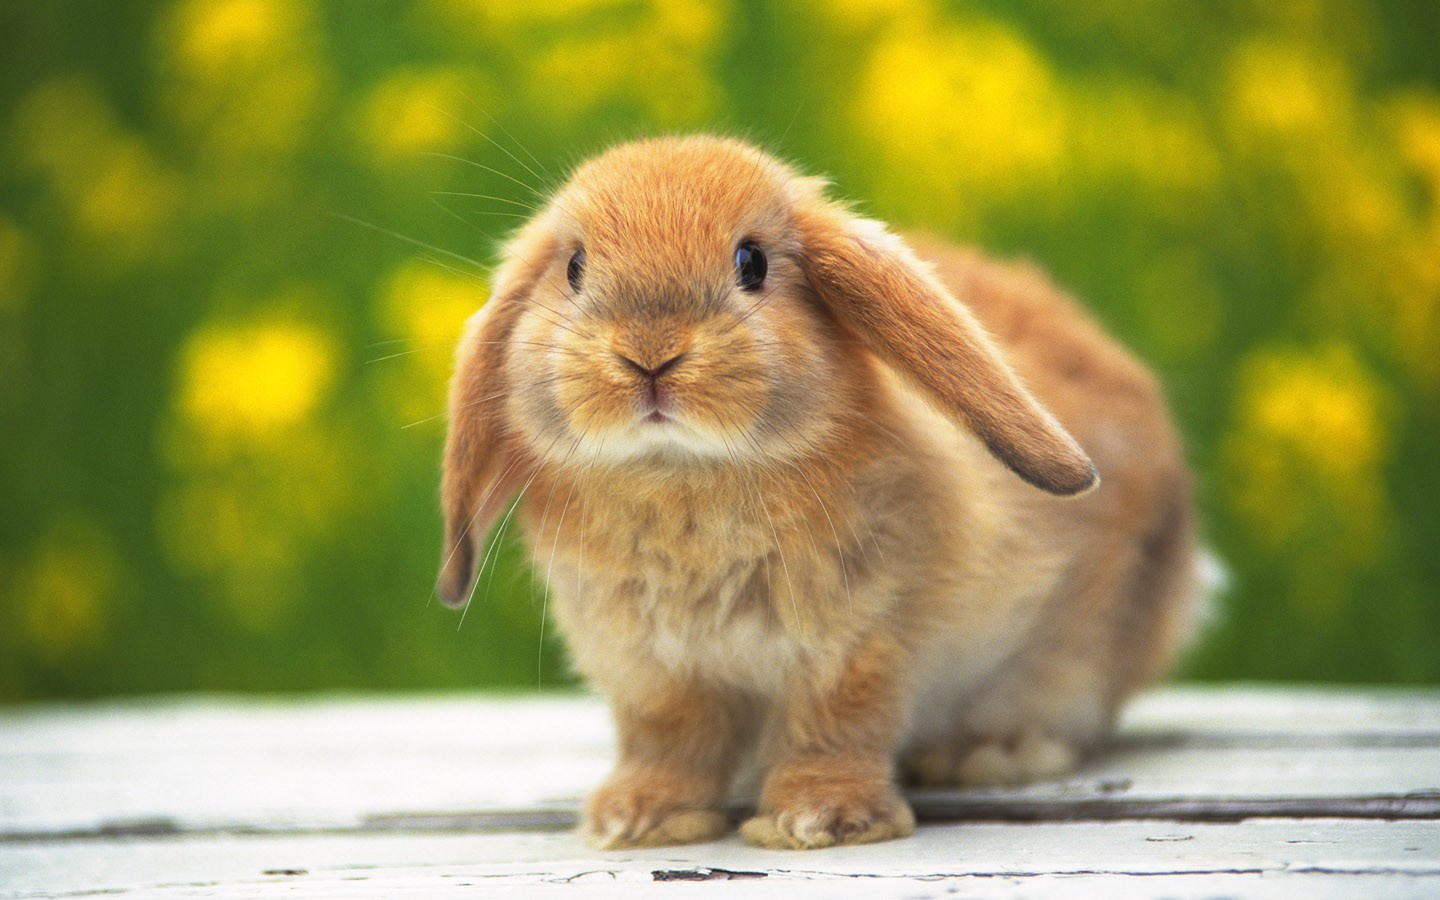 Cute Baby Rabbits 9758 Hd Wallpapers in Animals   Imagescicom